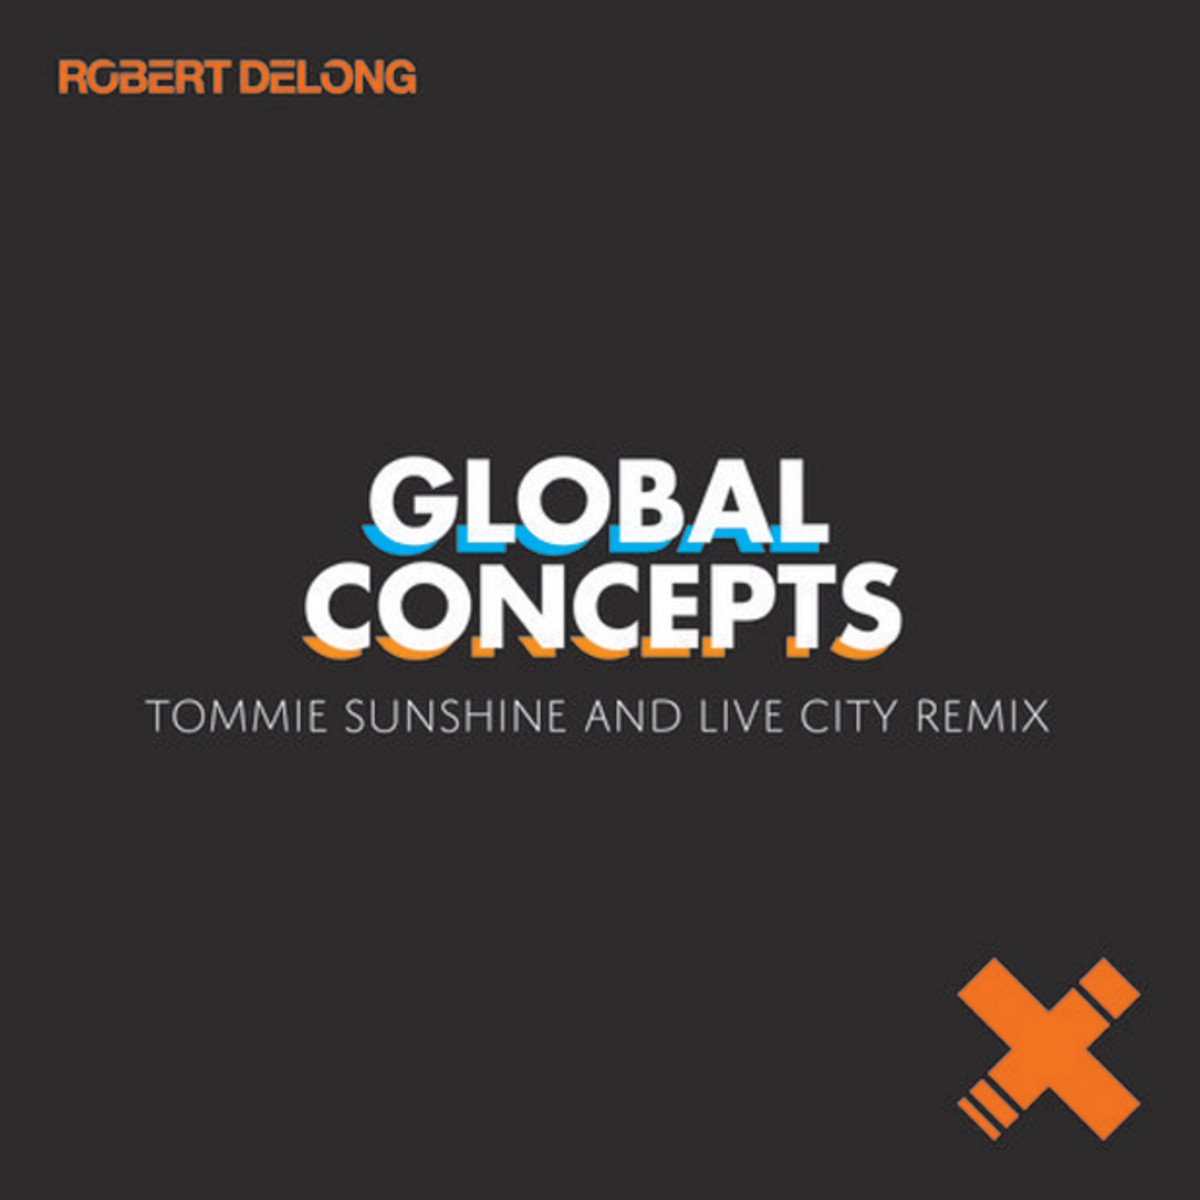 Exclusive Premier: New Electronic Music From Tommie Sunshine & Live City On The Remix of Richard DeLong's "Global Concepts"